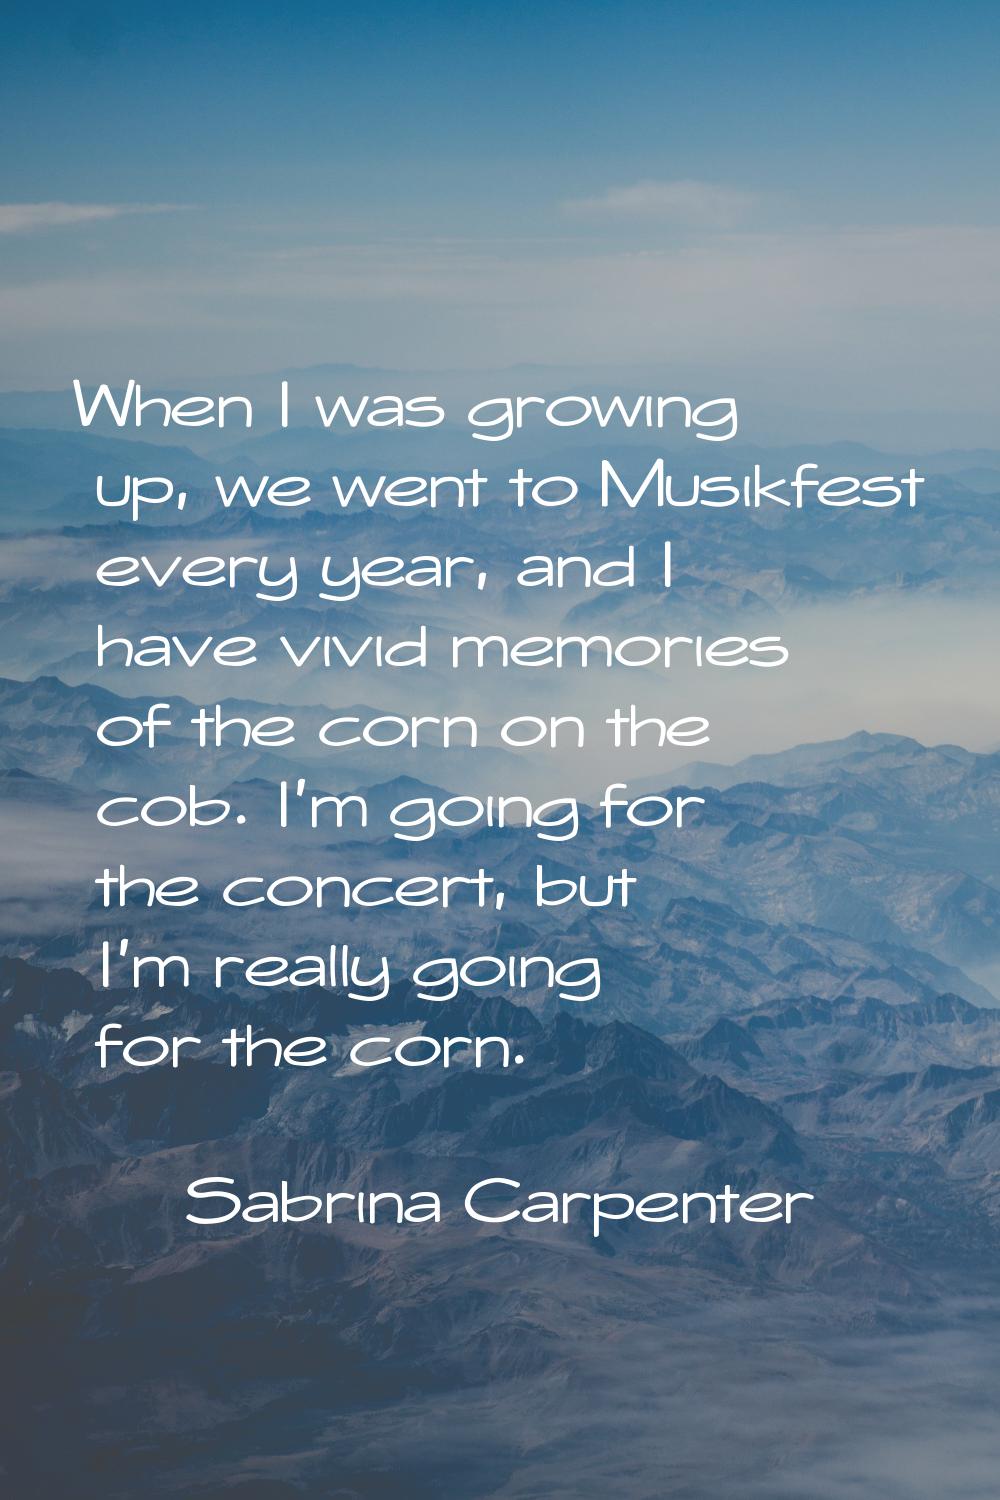 When I was growing up, we went to Musikfest every year, and I have vivid memories of the corn on th